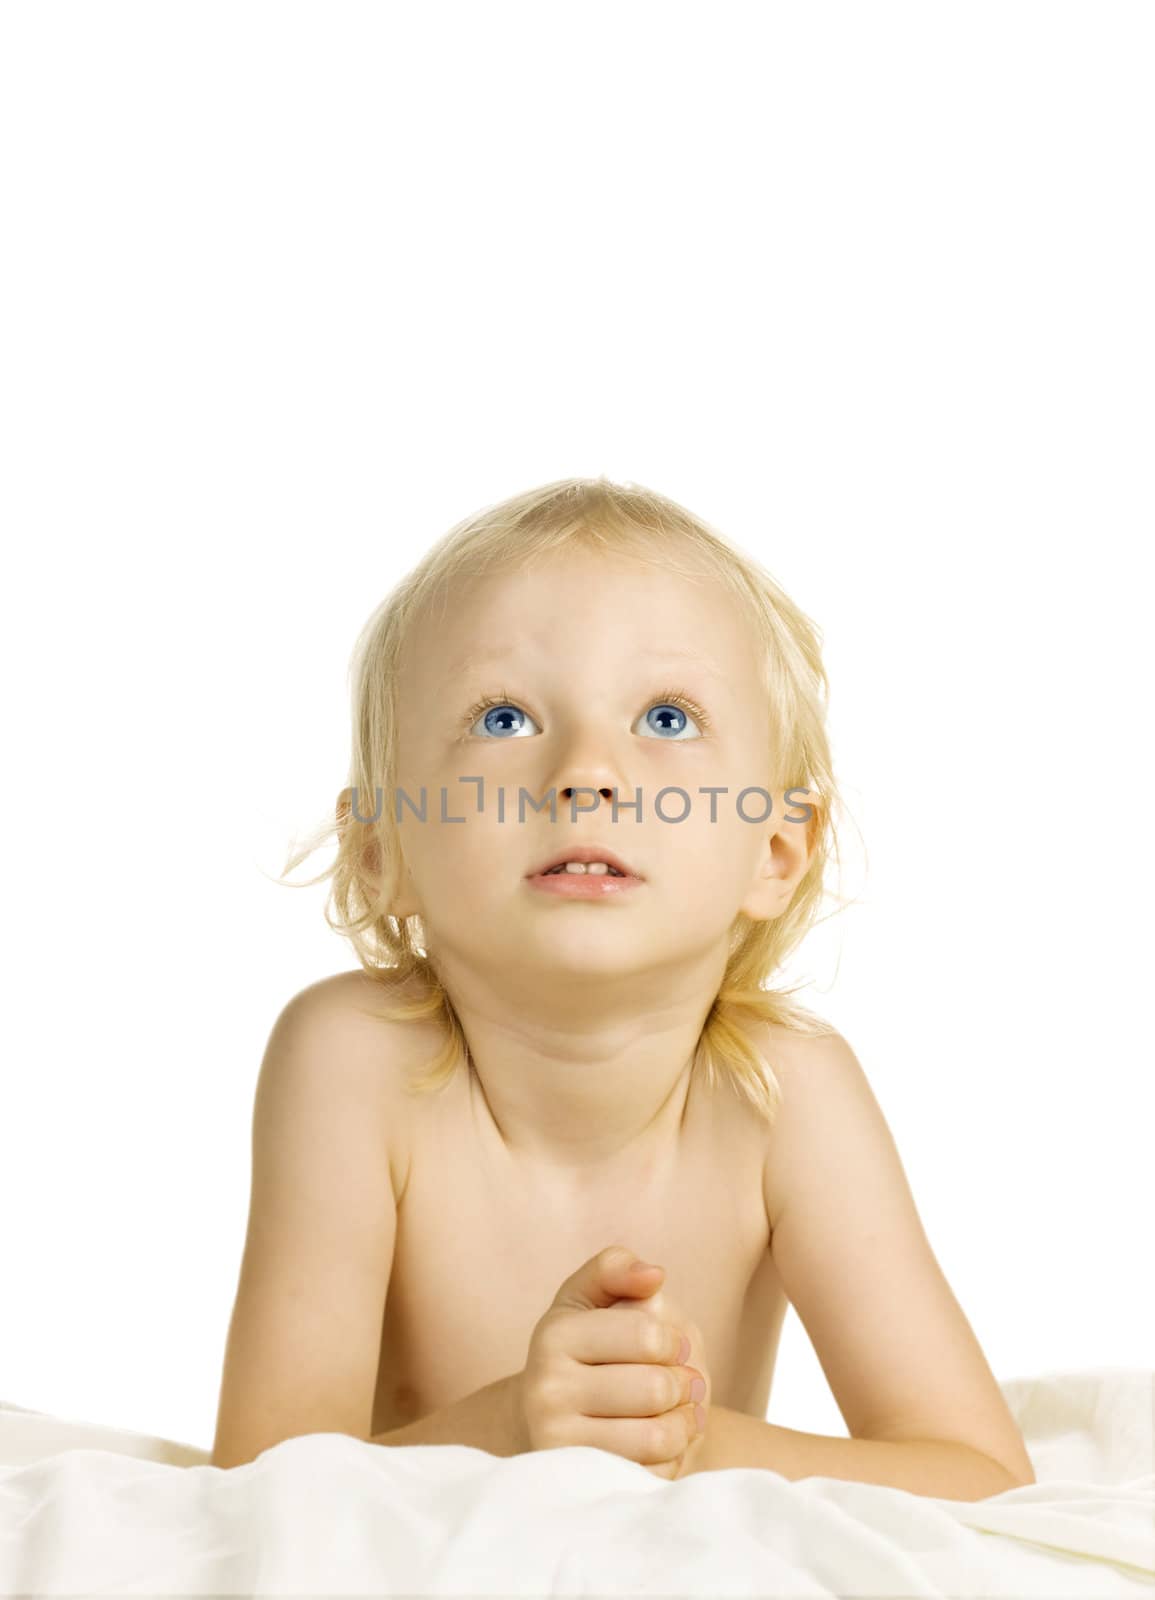 A cute young blond boy looking up and praying. Isolated over white.